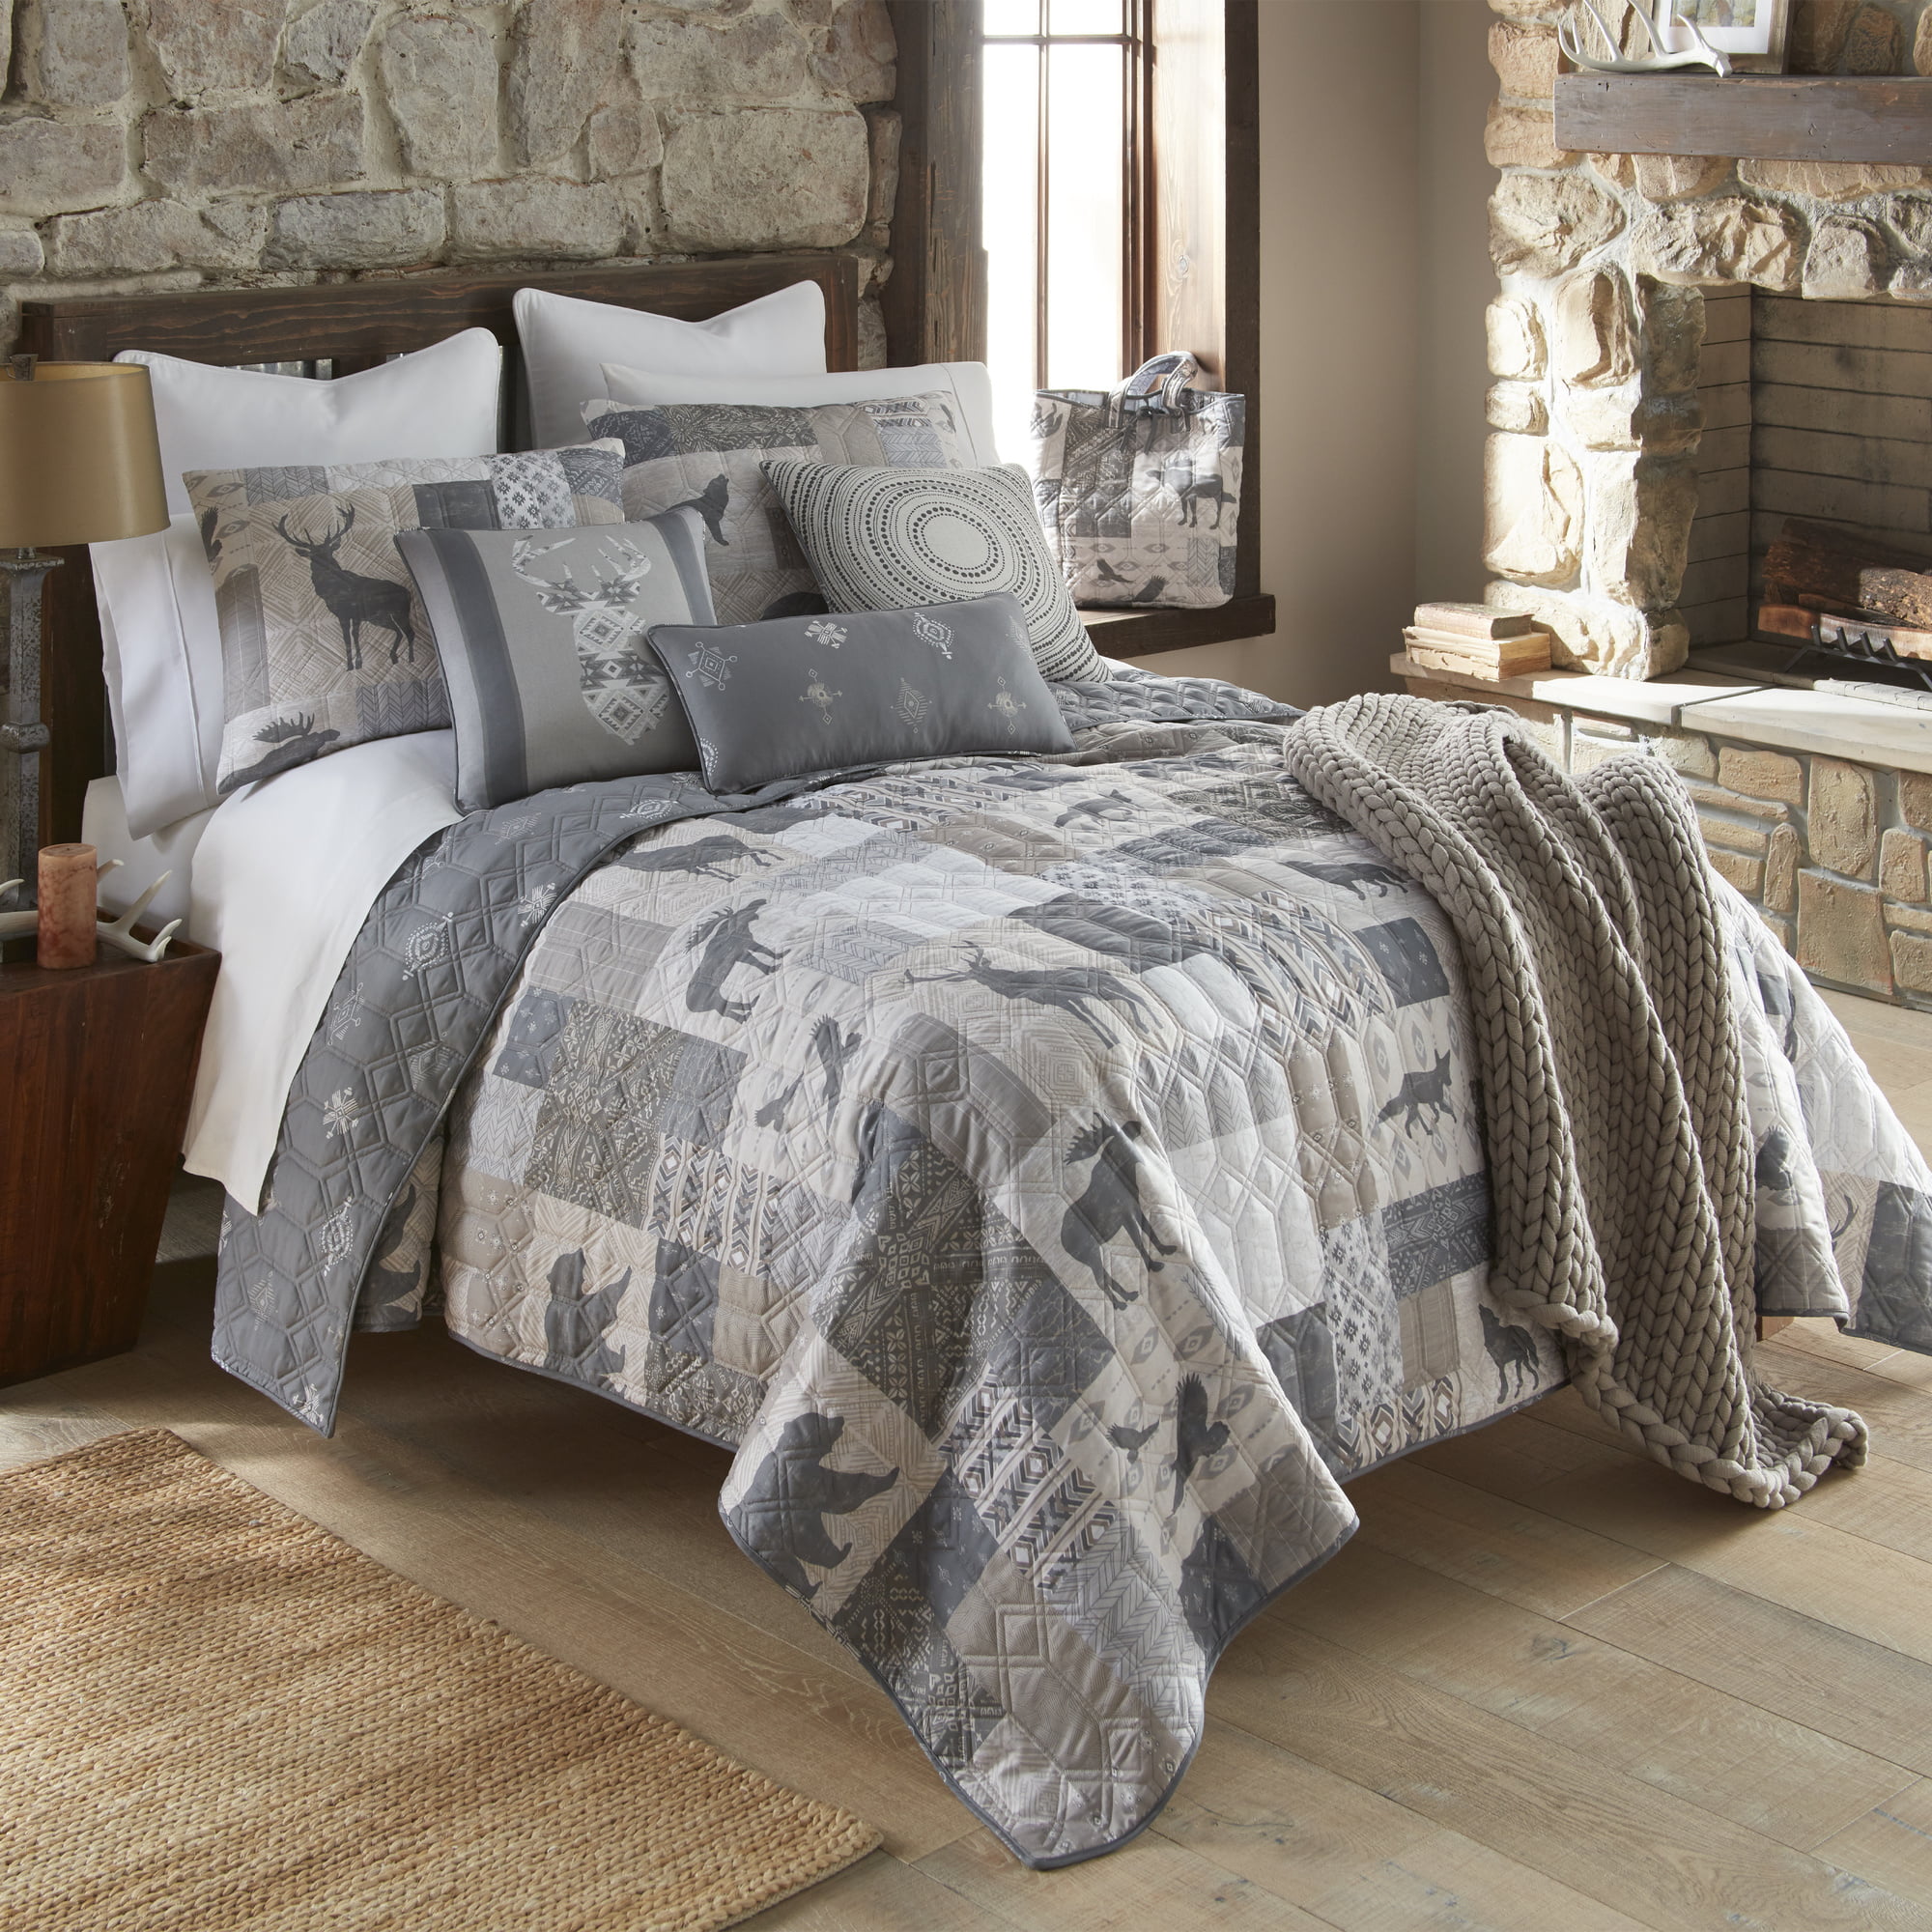 Donna Sharp King Quilt Set Machine Washable 3 Piece Set Wyoming King Quilt and Two King Pillow Shams